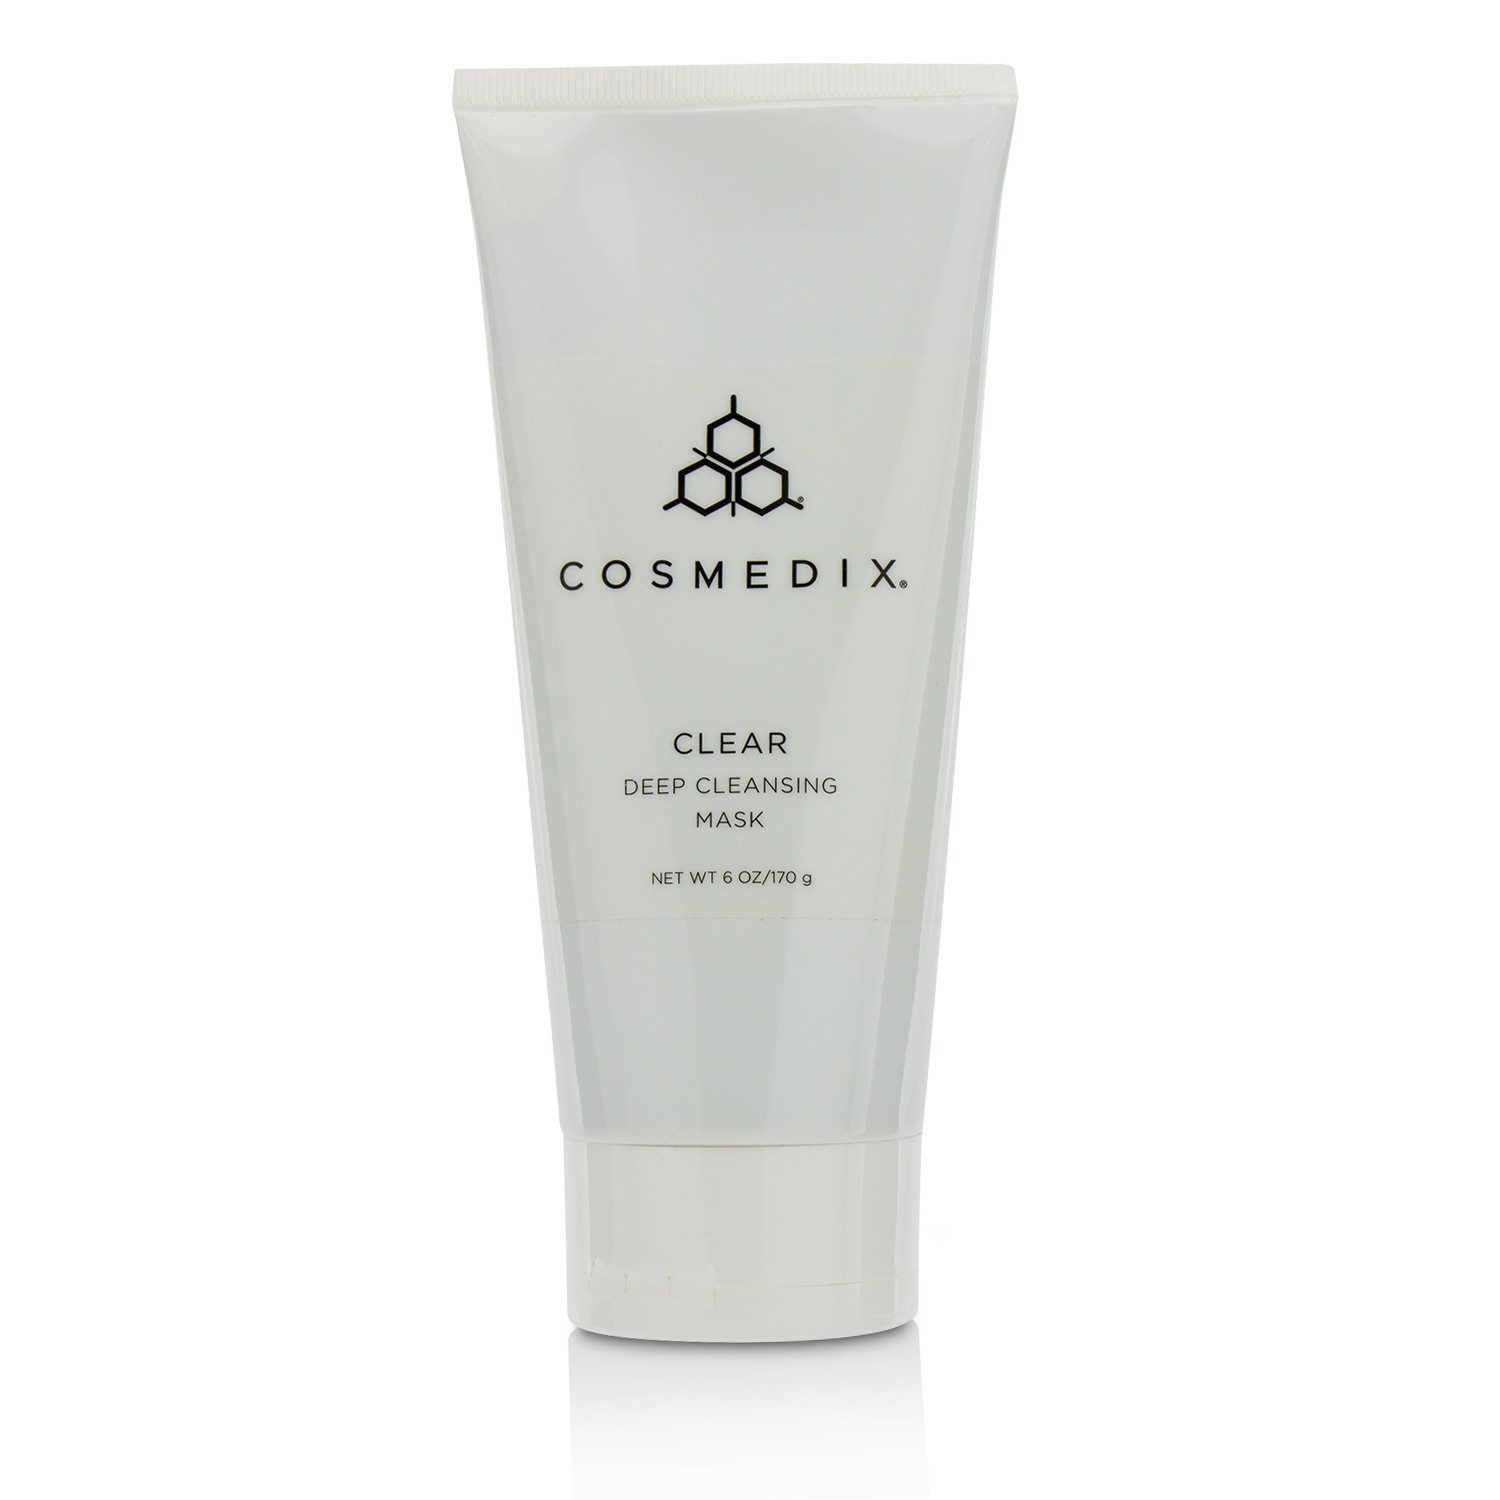 Clear Deep Cleansing Mask - Salon Size CosMedix Image